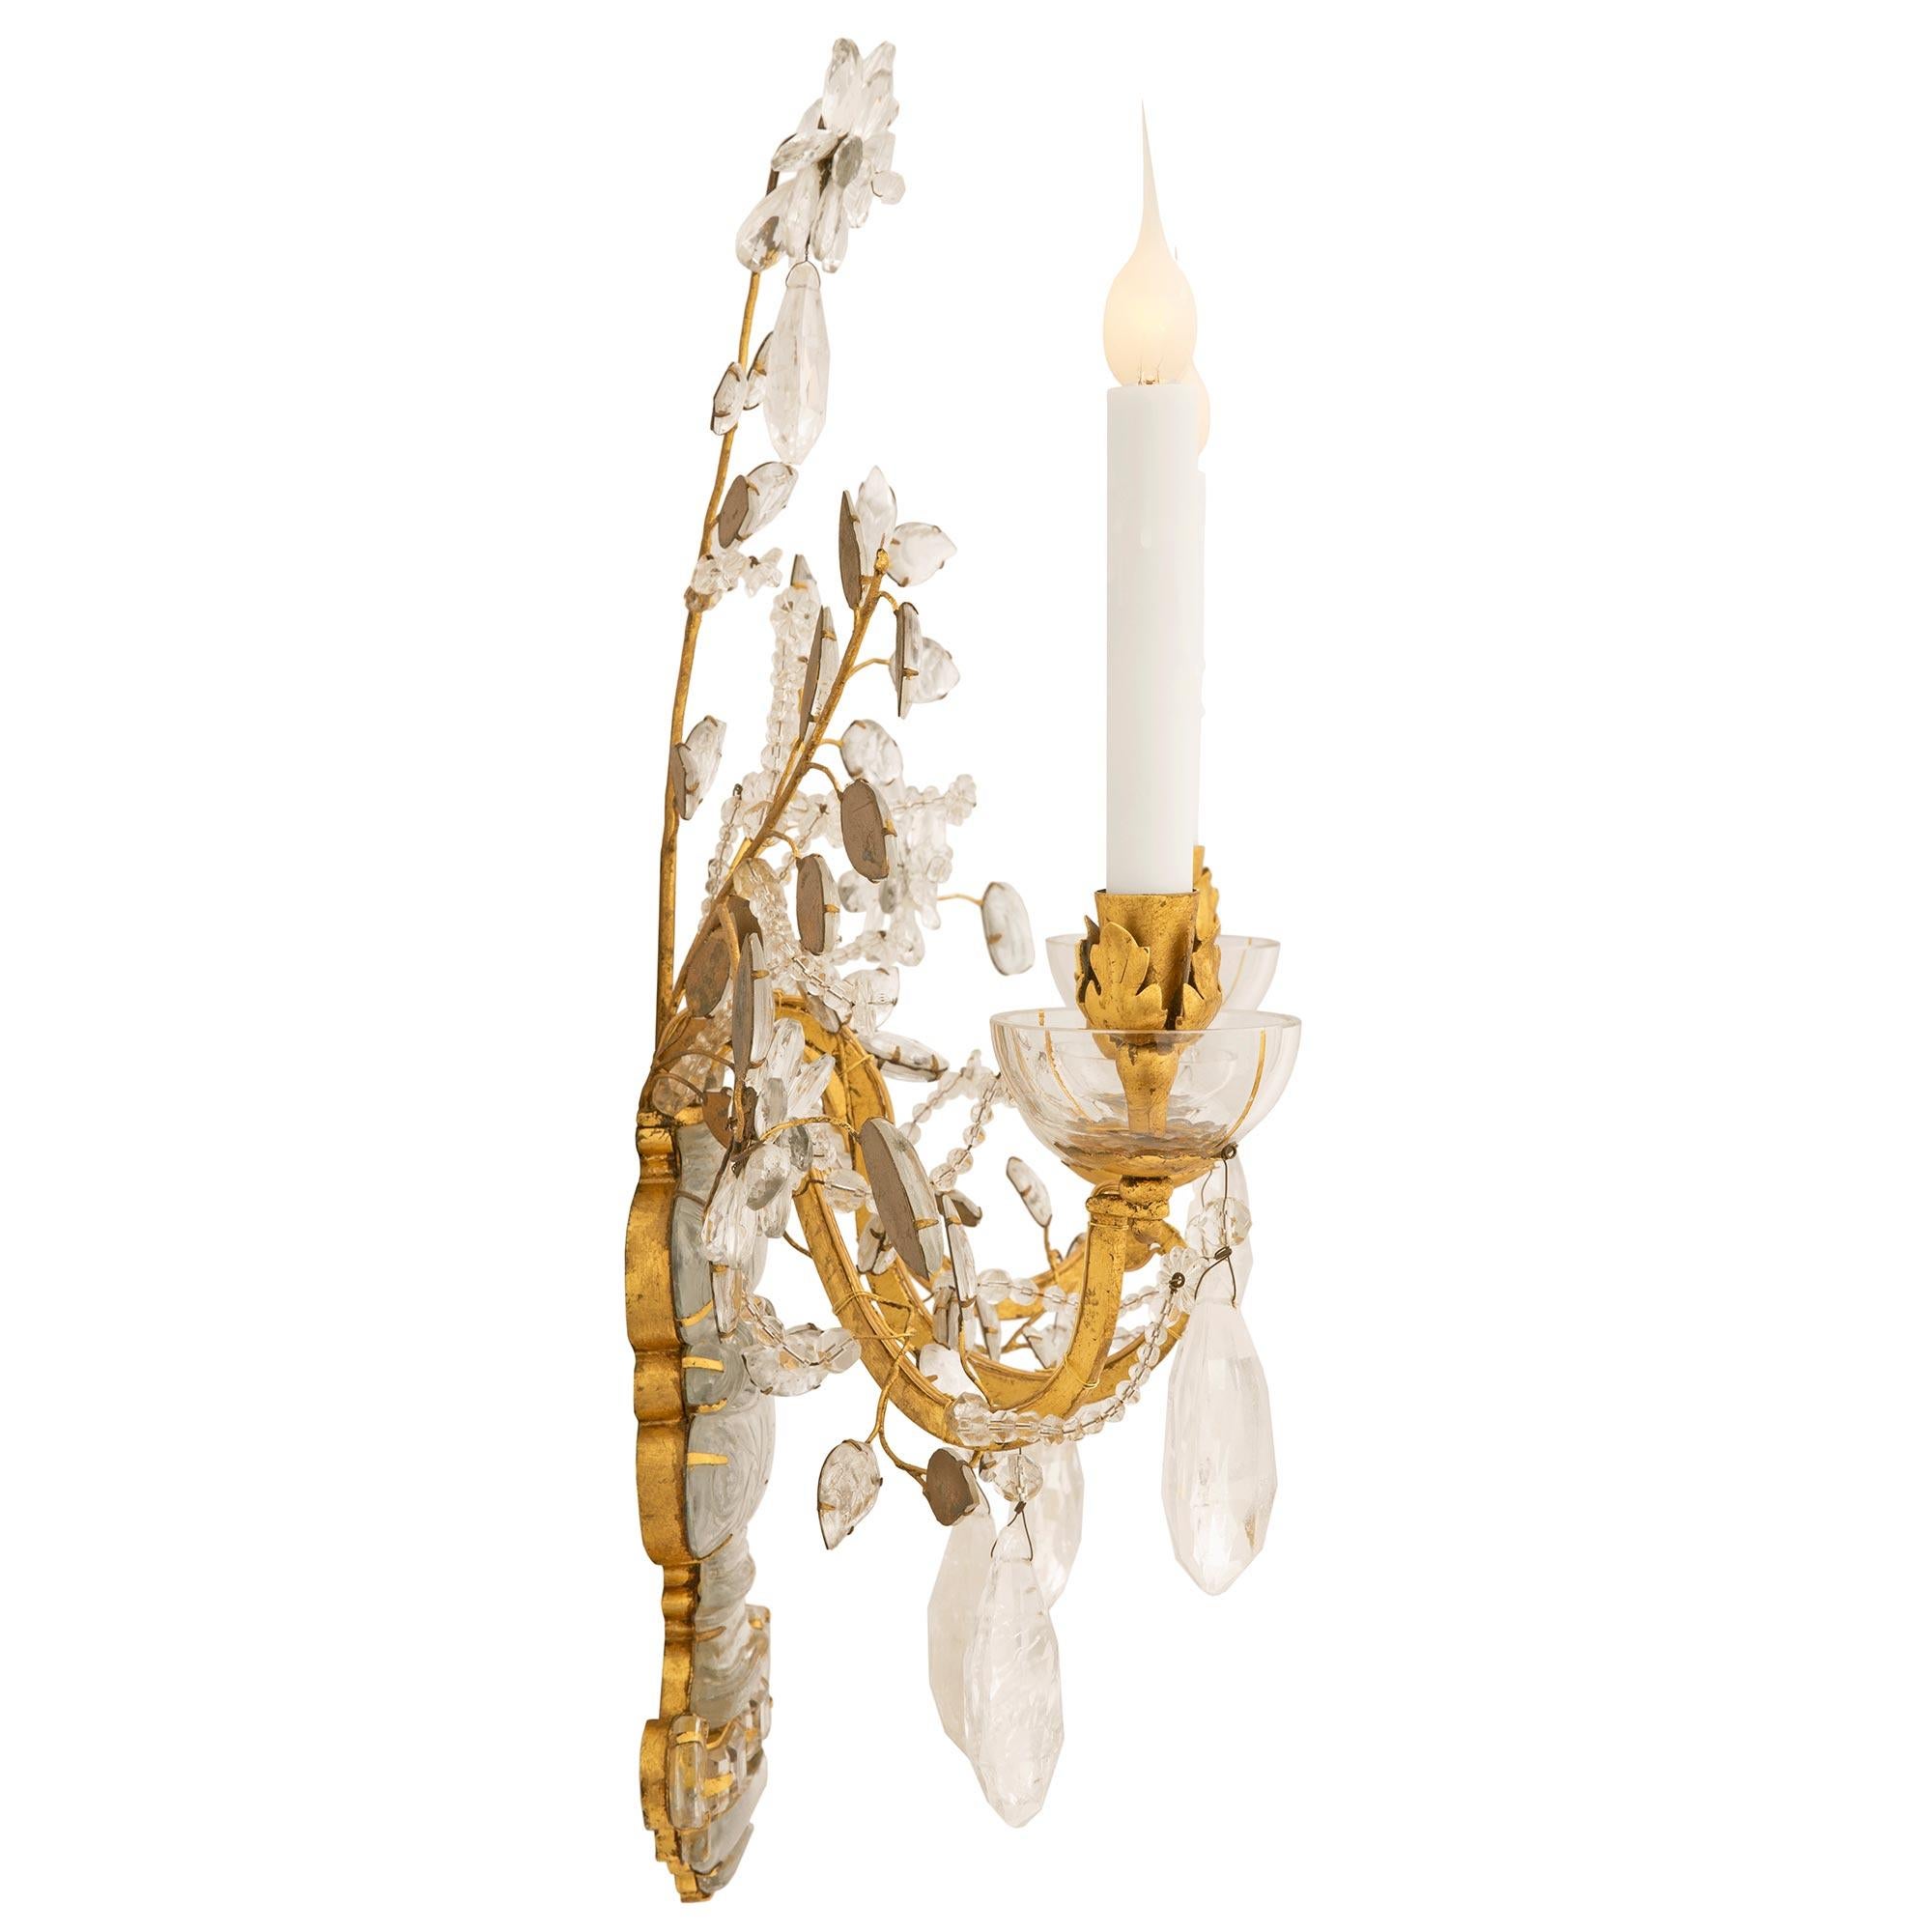 Gilt True Pair Of French 20th c. Louis XVI St. Crystal & Rock Crystal Sconces For Sale